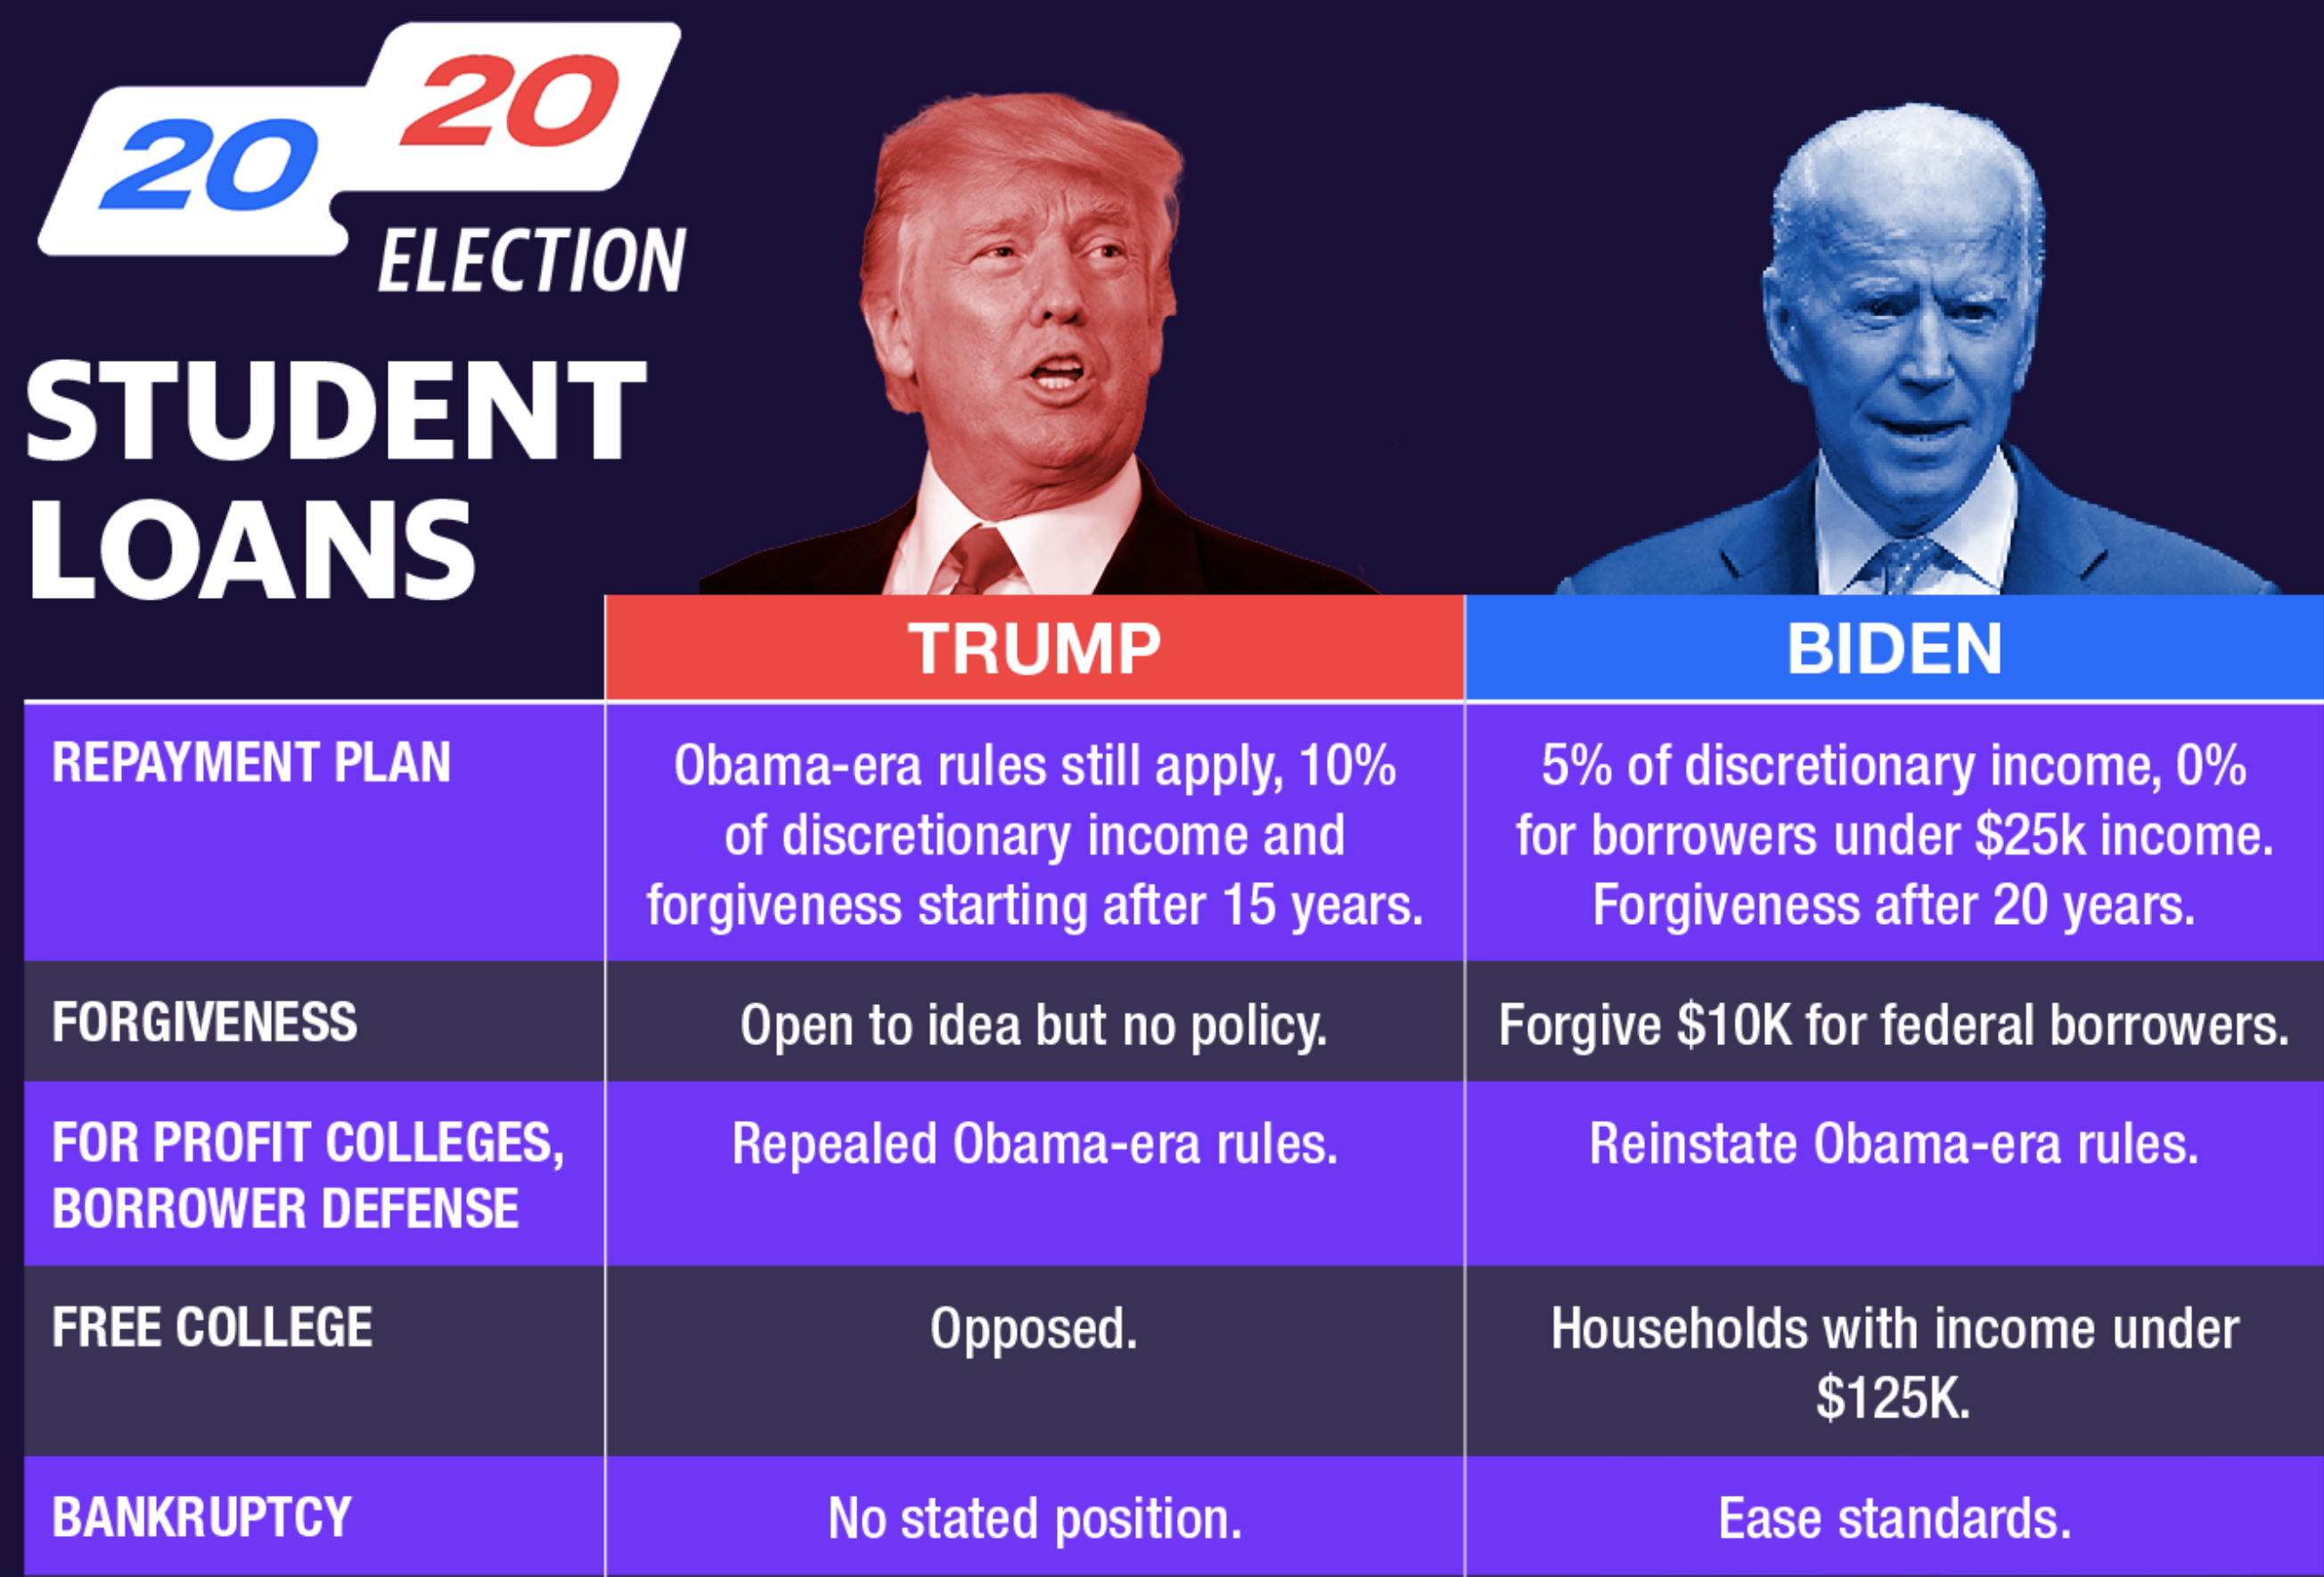 Trump v. Biden: Here's what's at stake for student loan borrowers